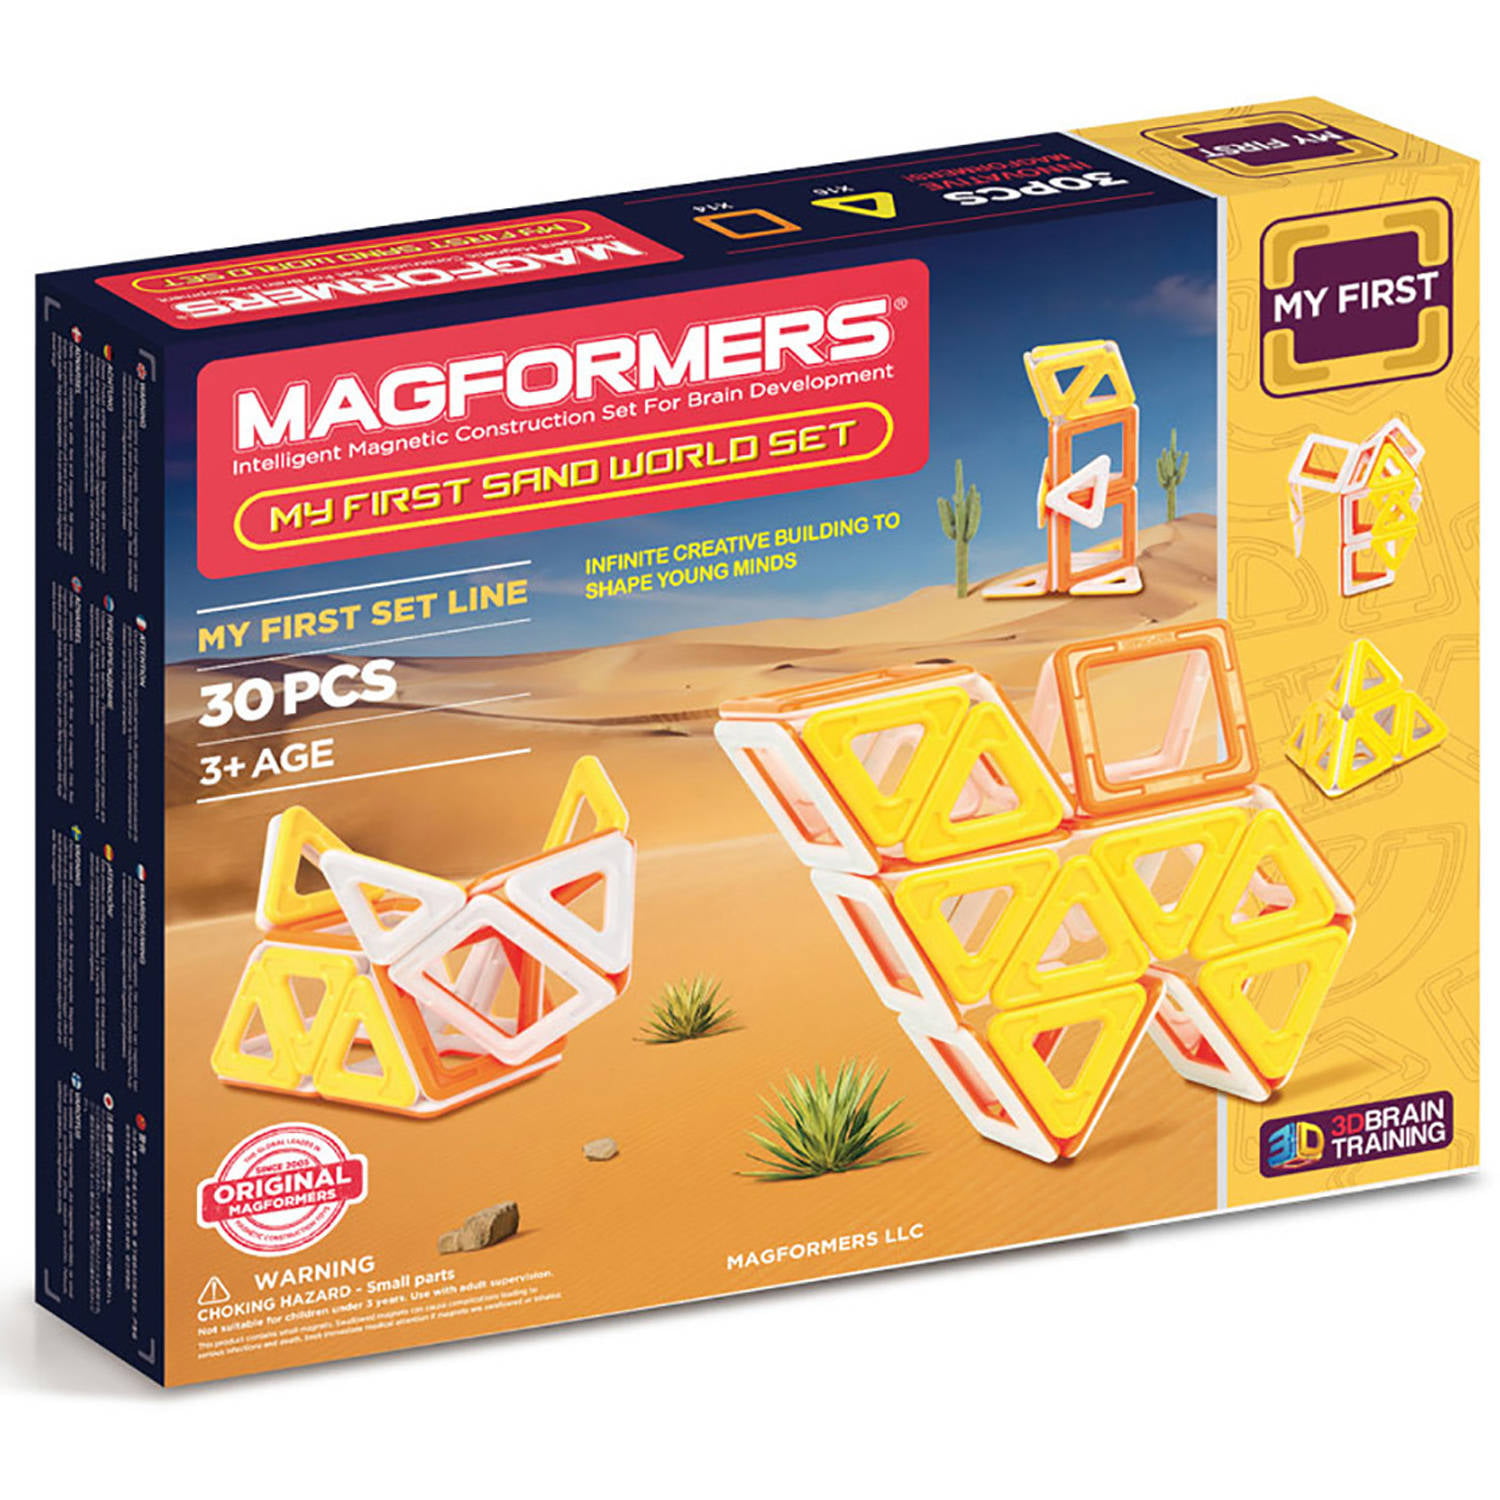 MAGFORMERS Magformers My First Sand World Set Magnetic Tile Toys 30 pcs Complete Yellow 